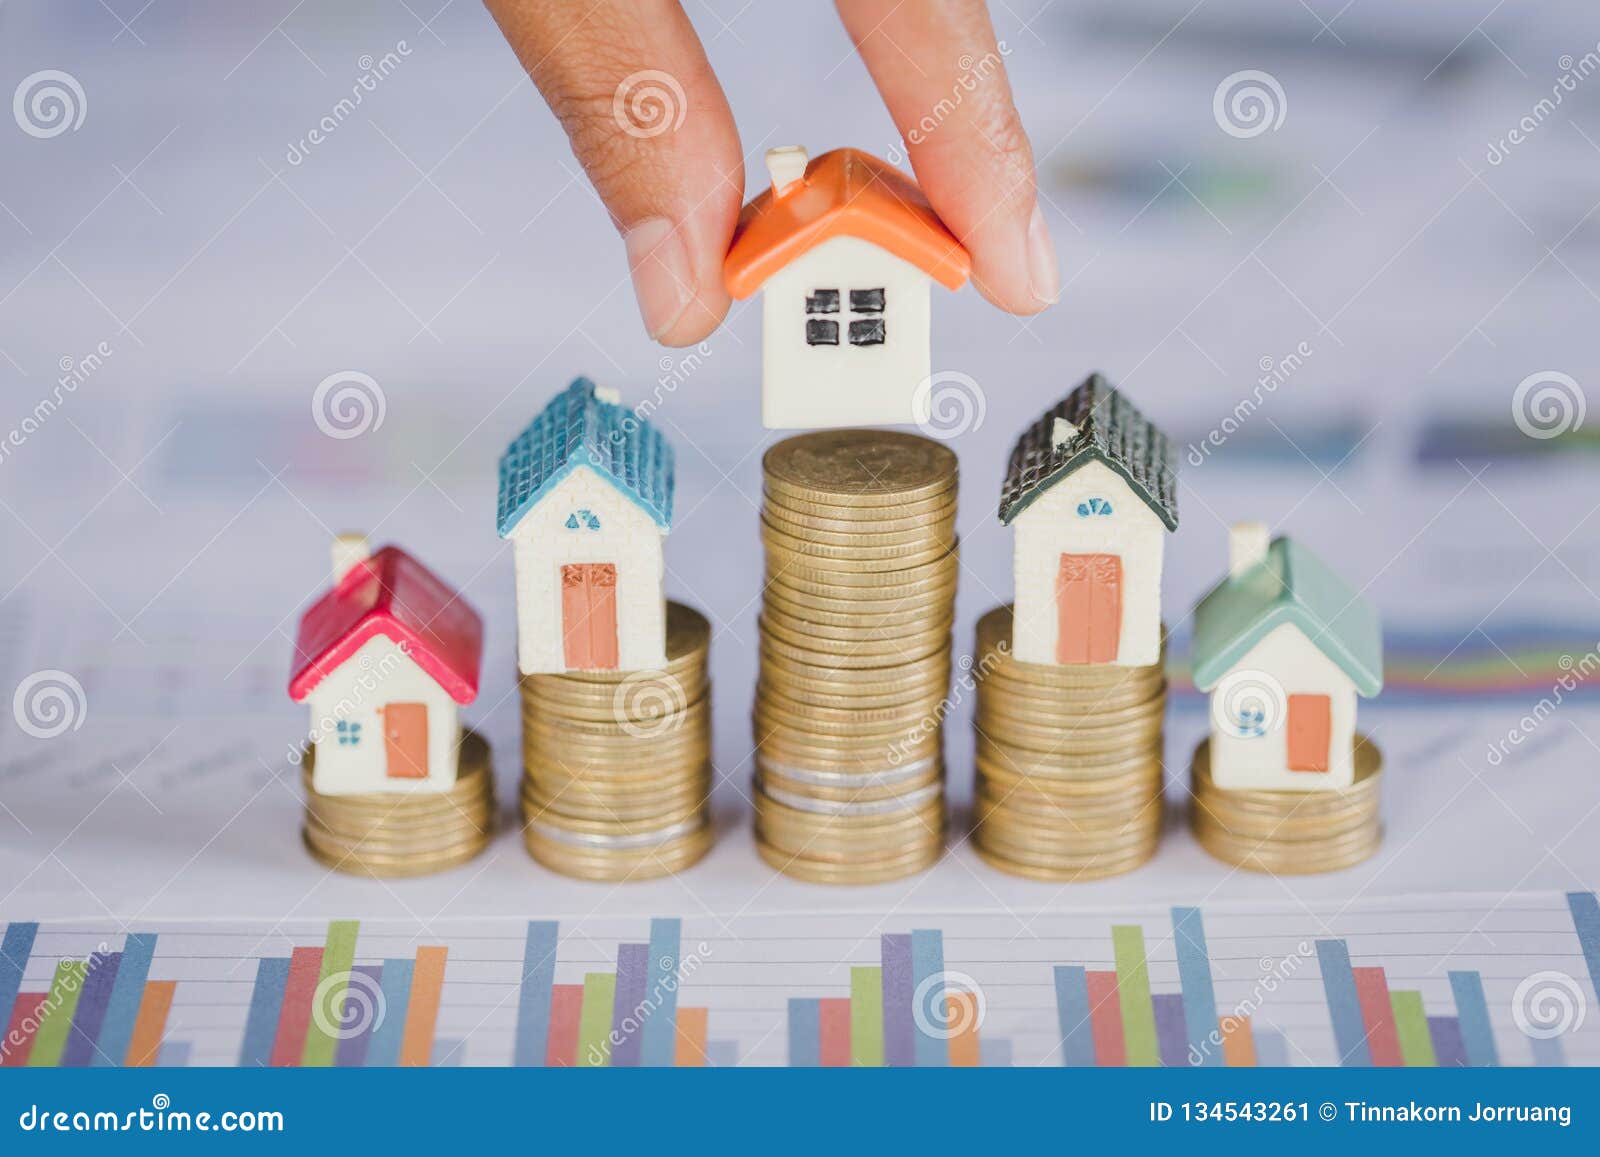 human hand putting house model on coins stack. concept for property ladder, mortgage and real estate investment